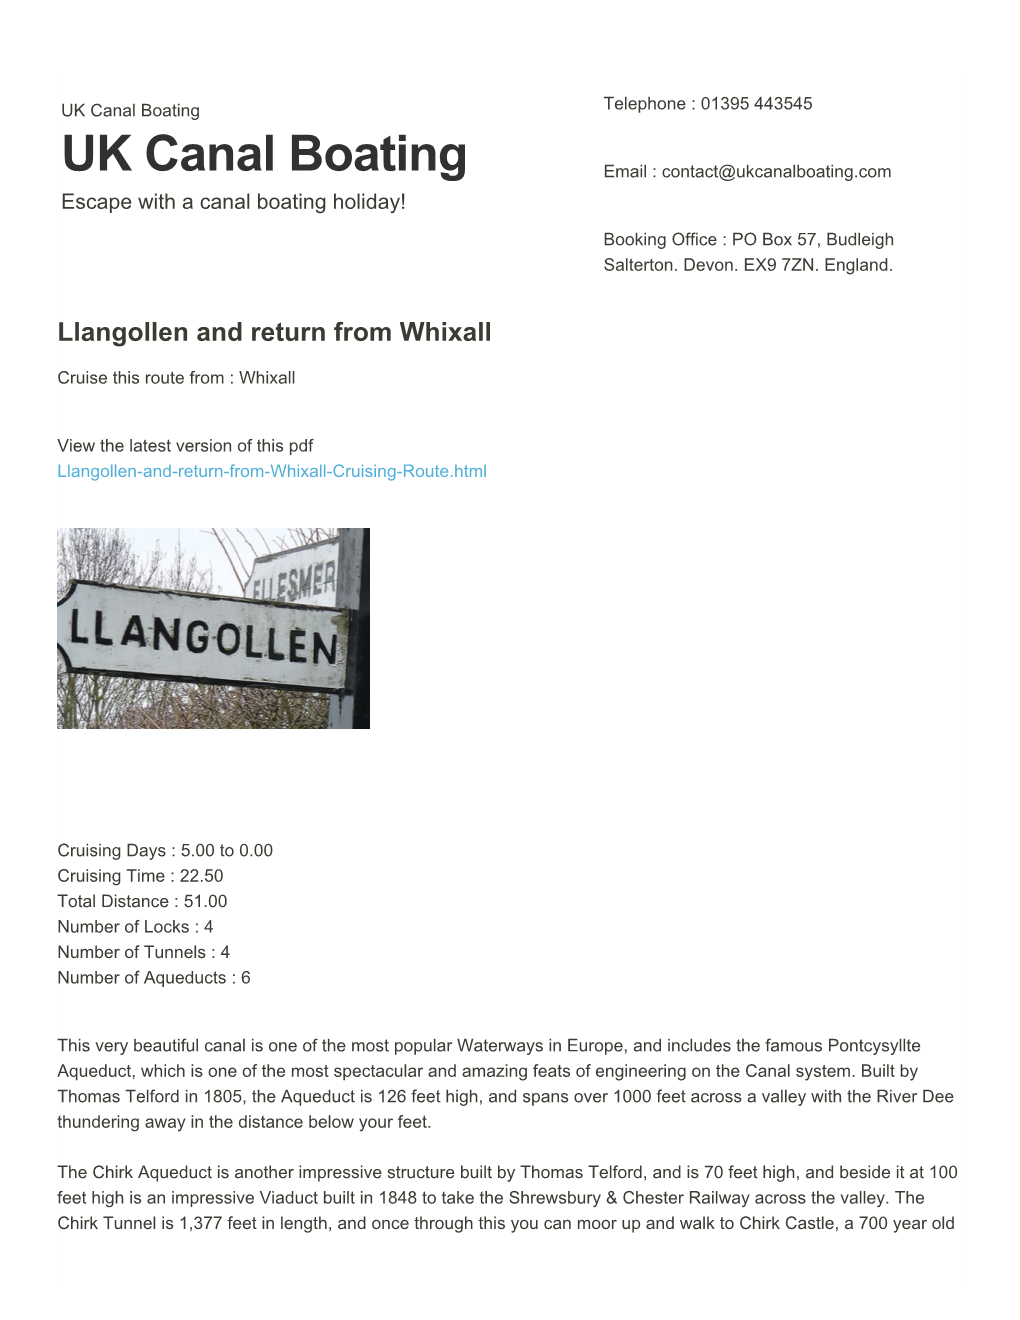 Llangollen and Return from Whixall | UK Canal Boating